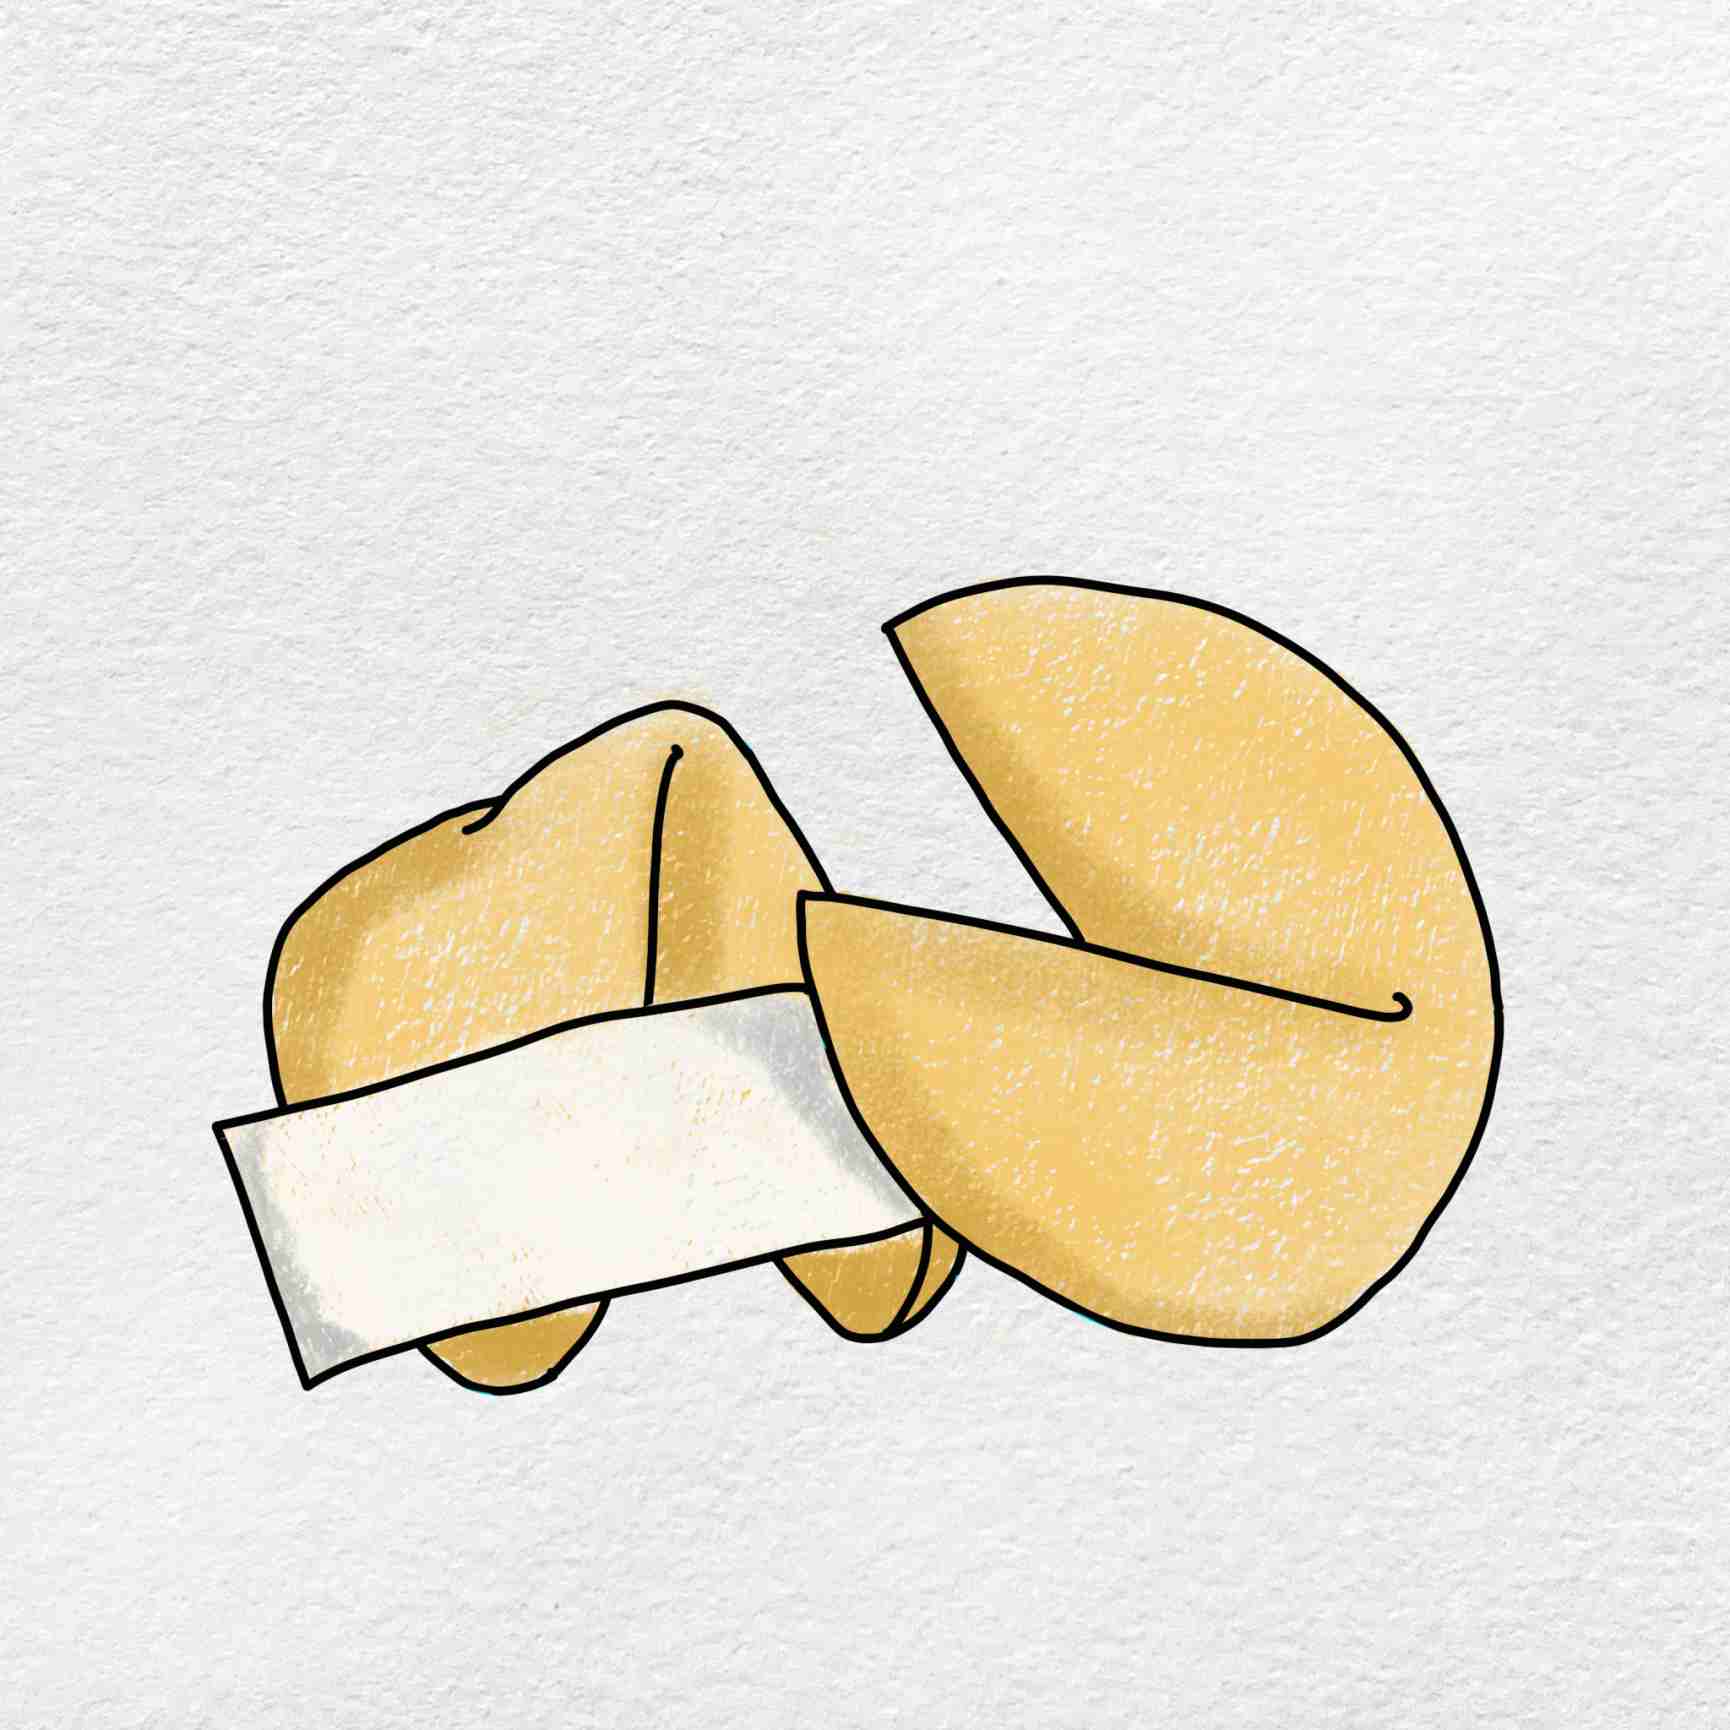 How to draw a fortune cookie